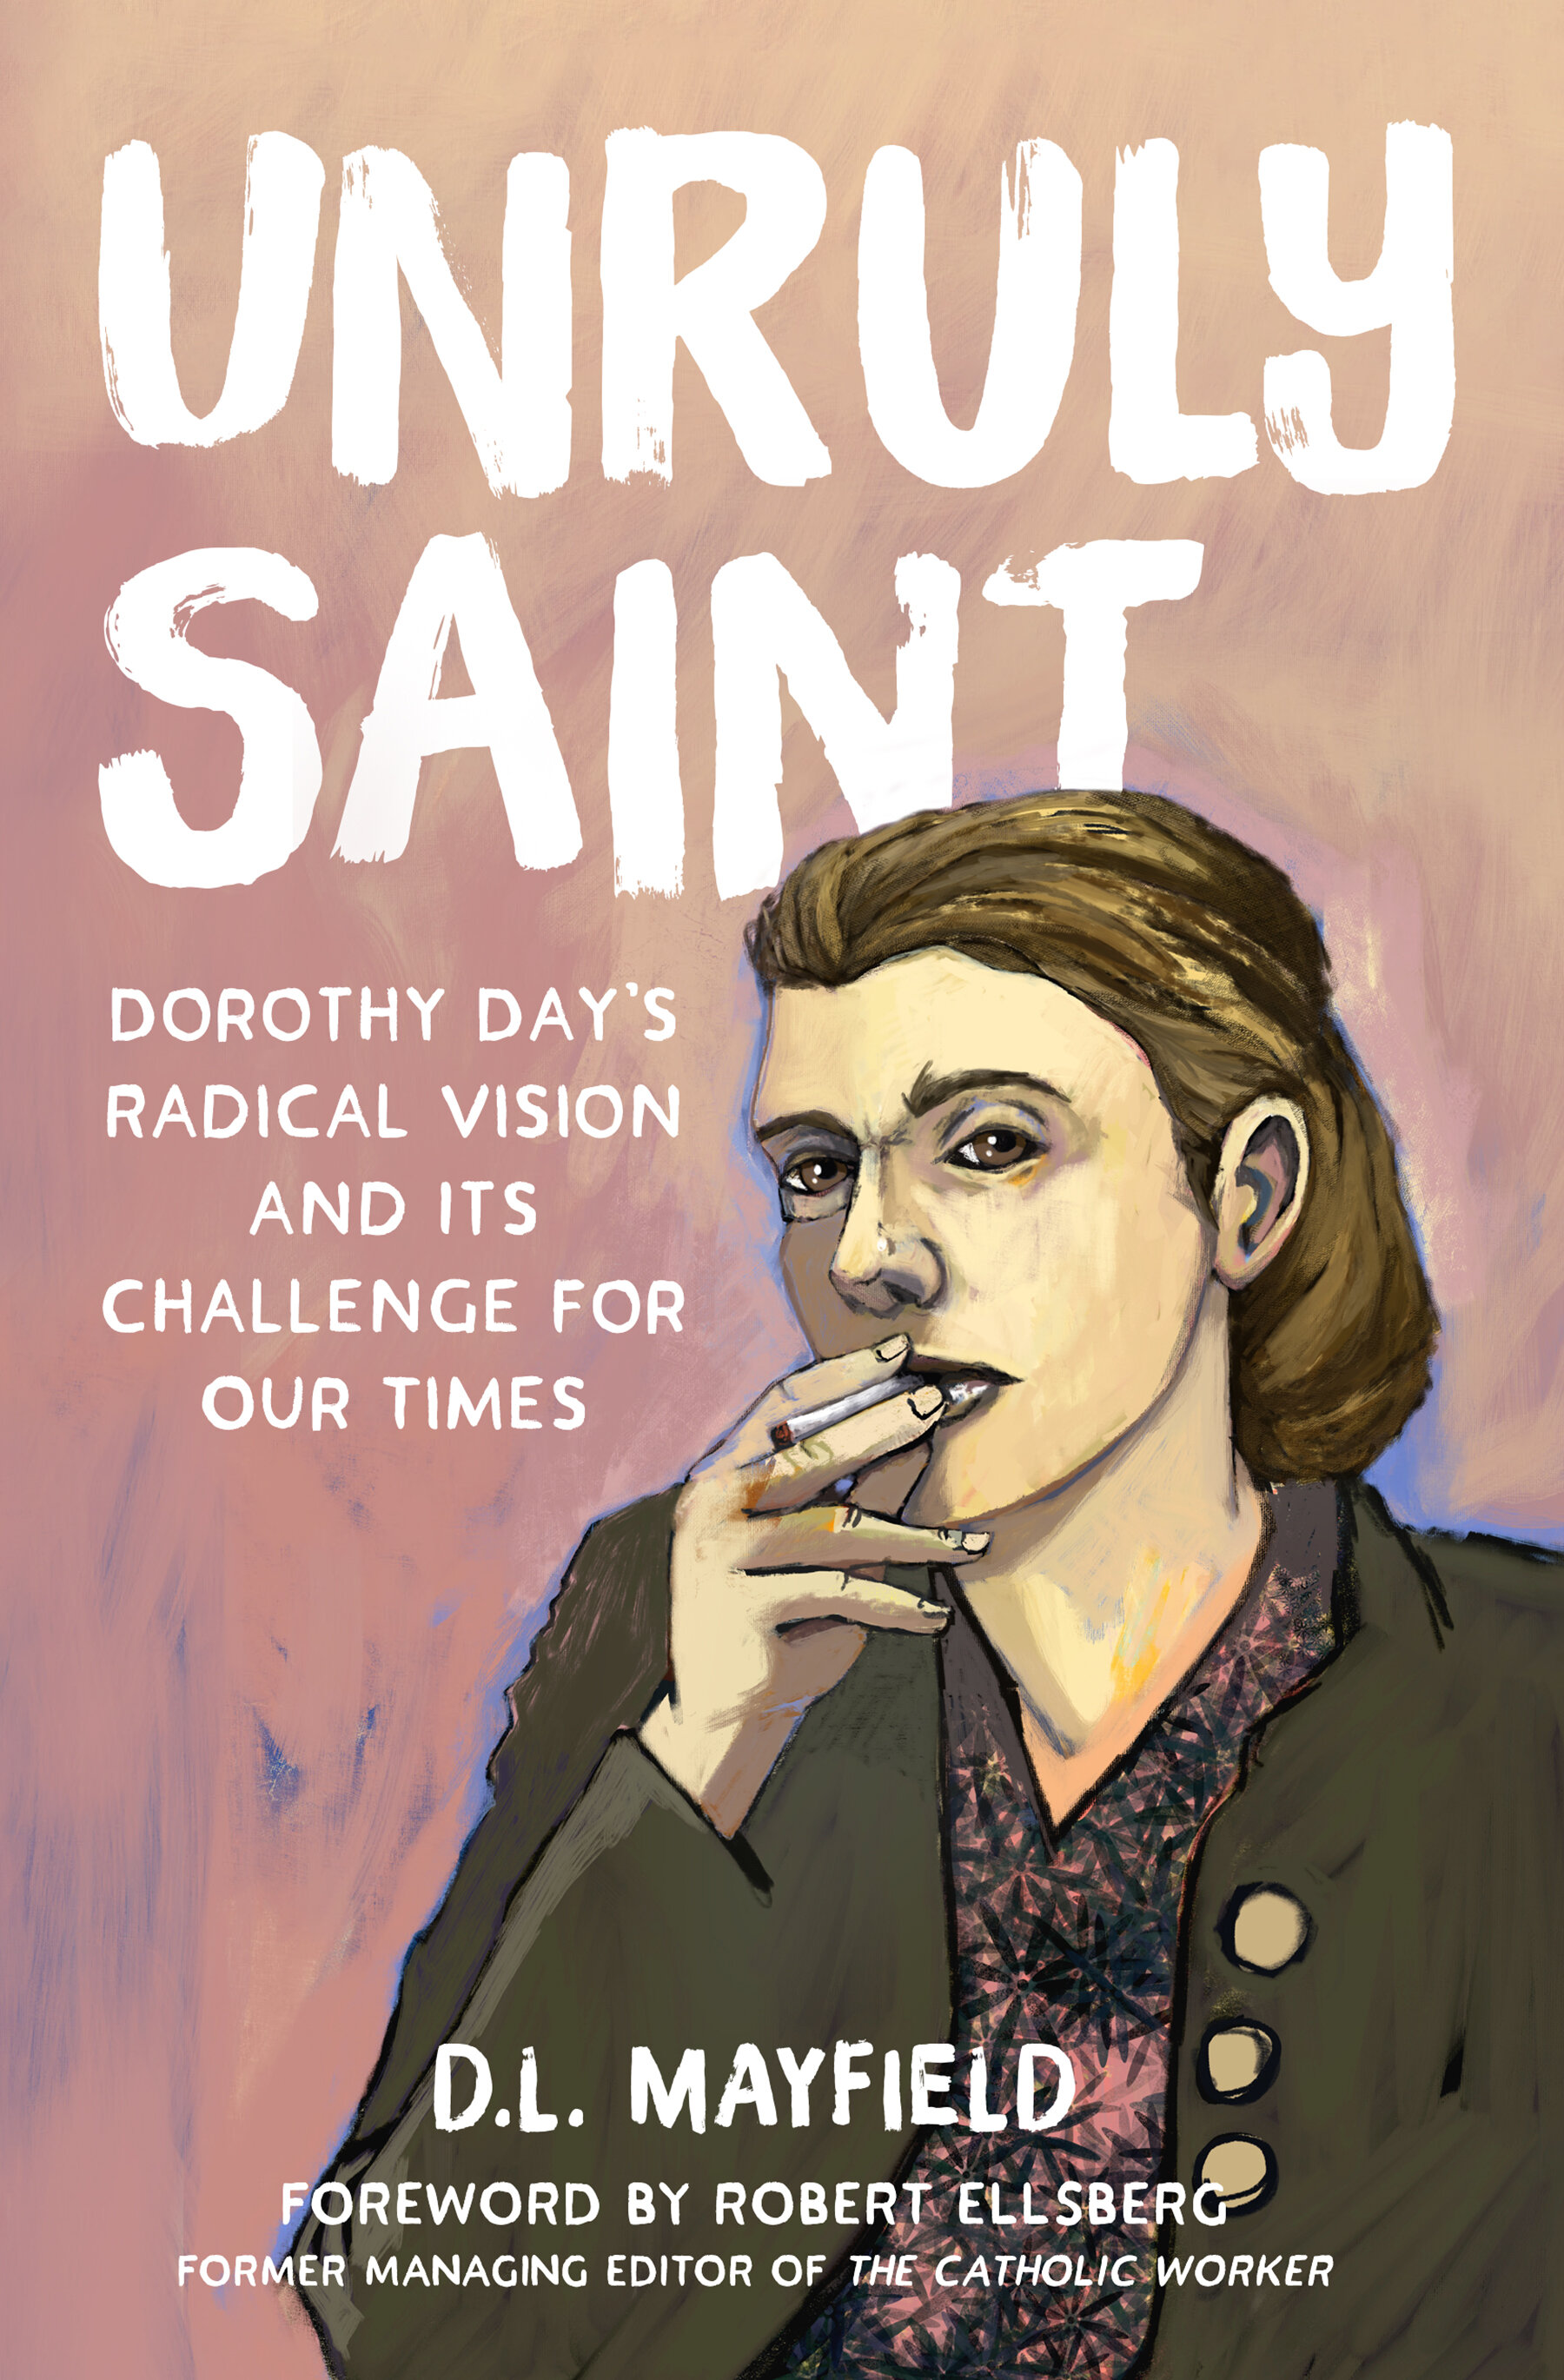 Unruly Saint: Dorothy Day’s Radical Vision and its Challenge for Our Times